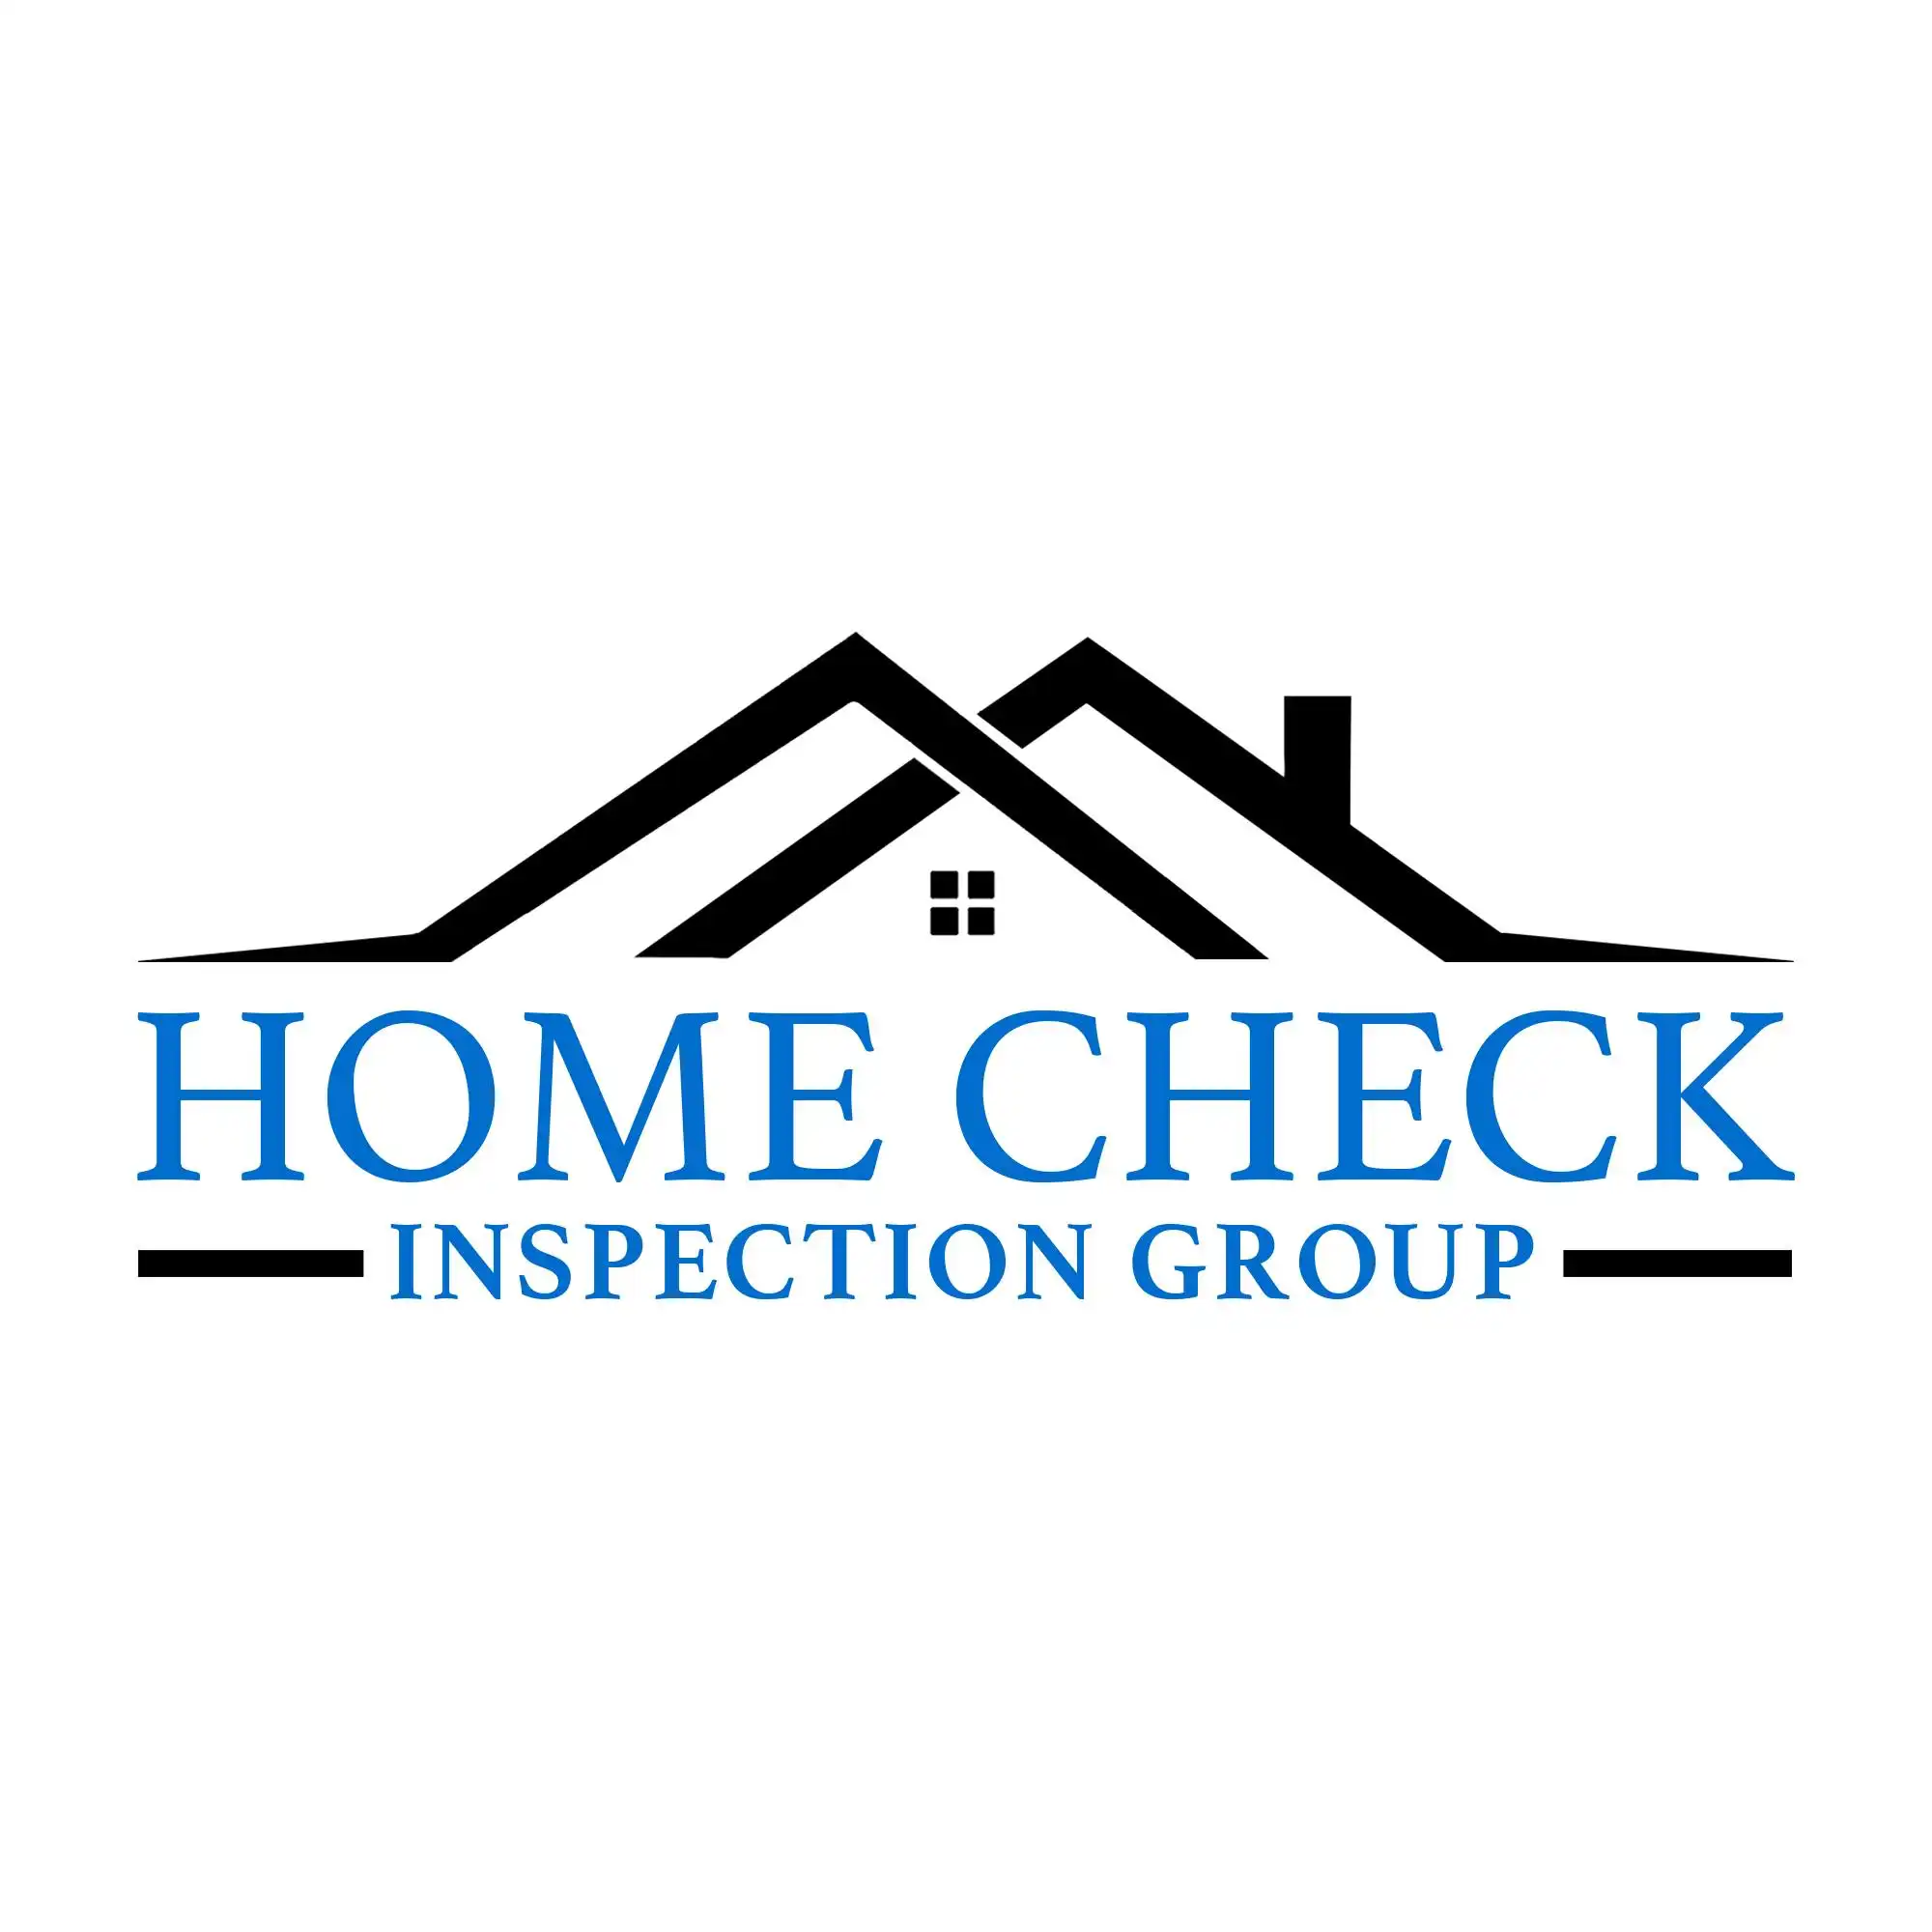 Home Check Inspection Group